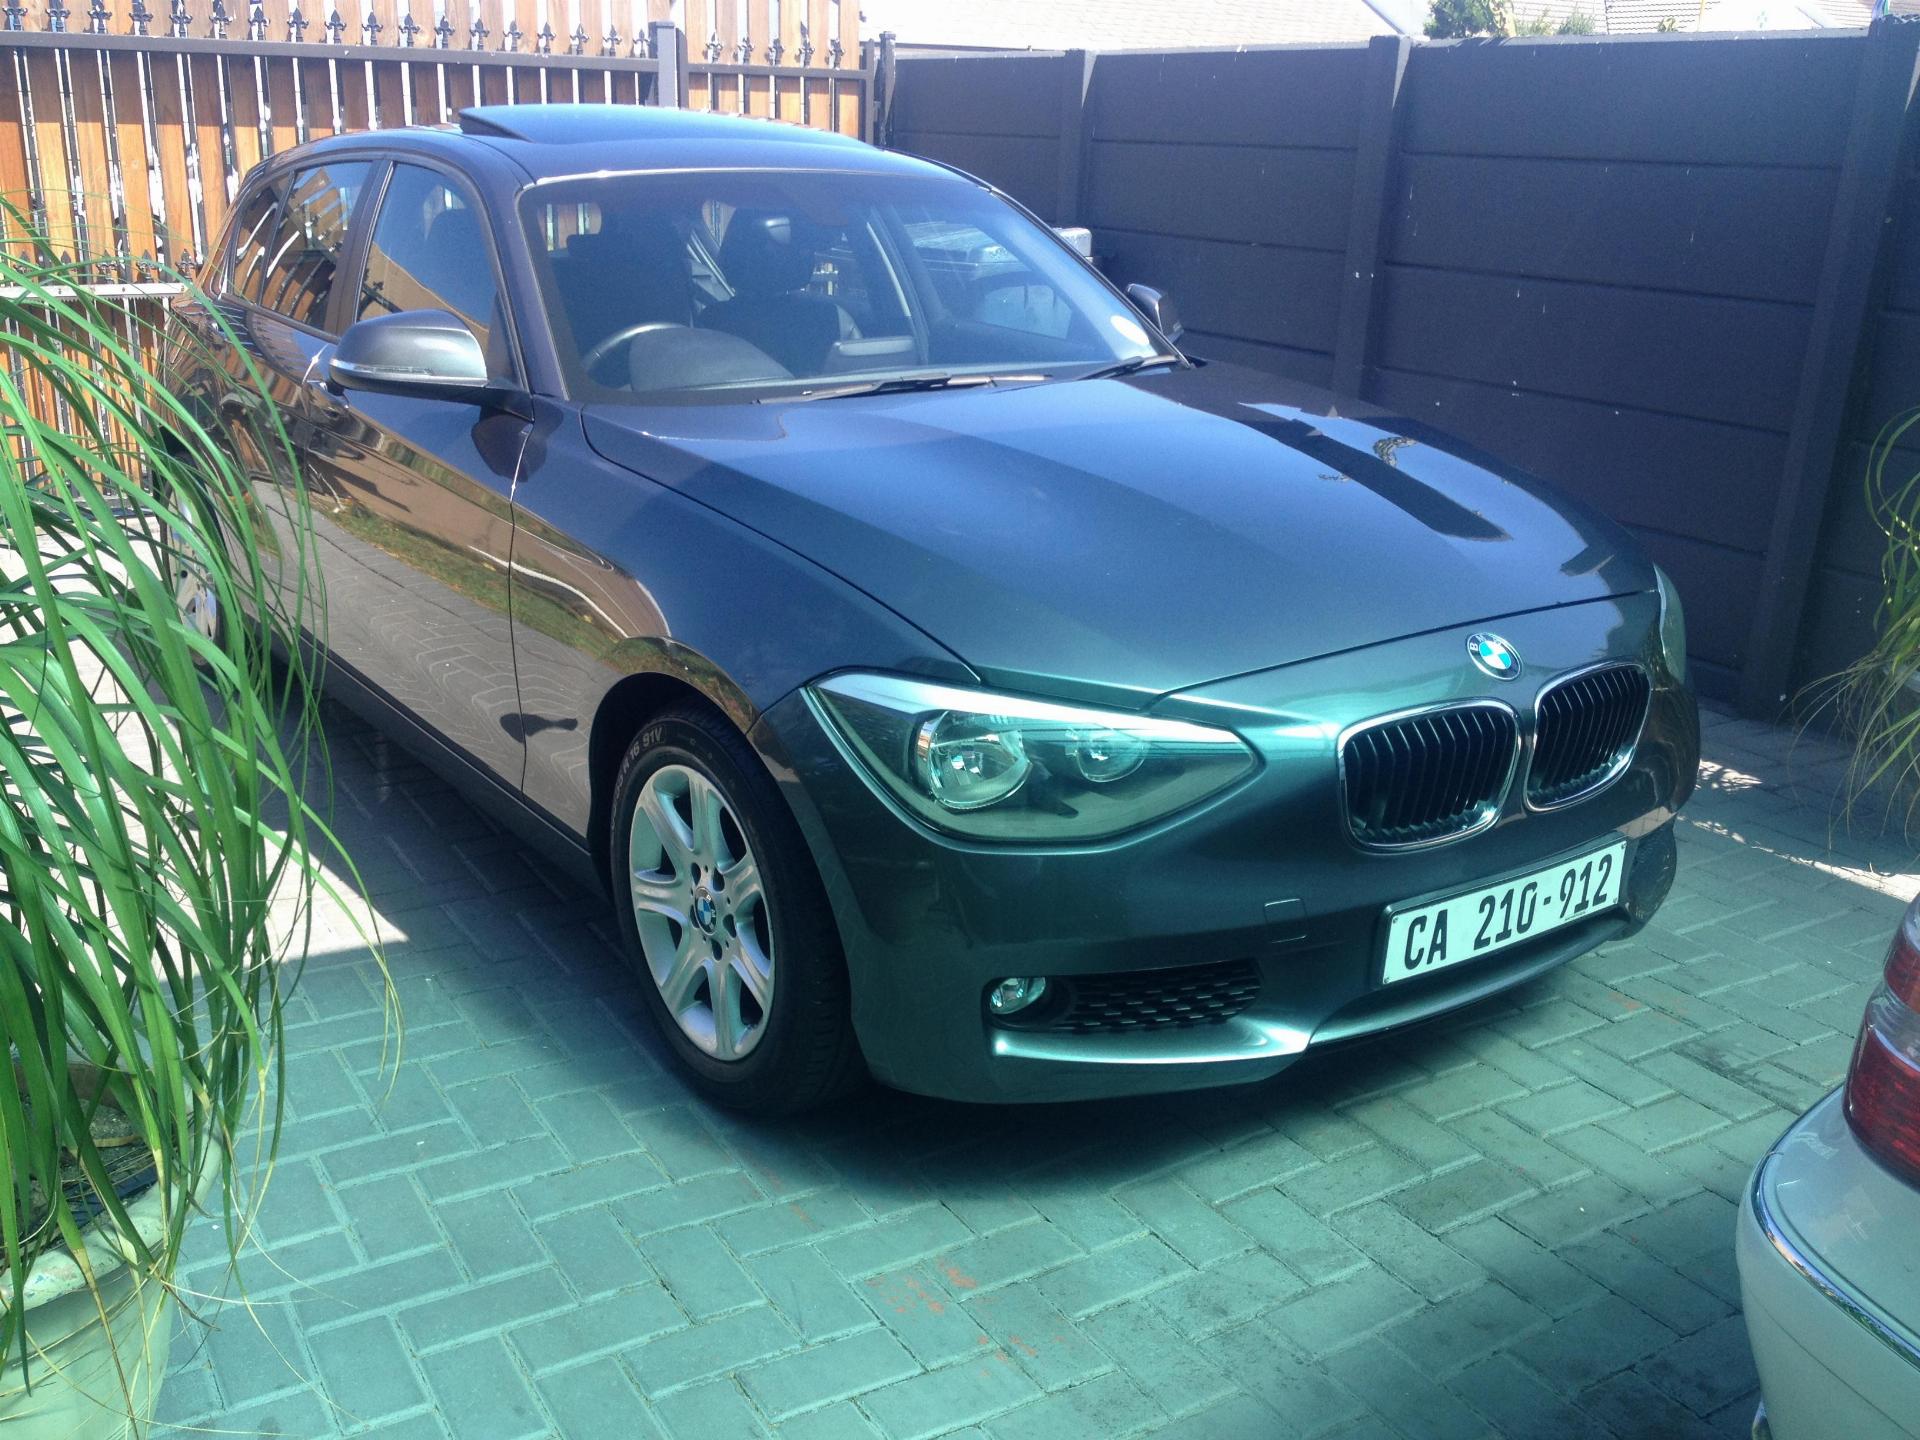 BMW 1 Series Doctors VEHICLE. IN Very Good Condition